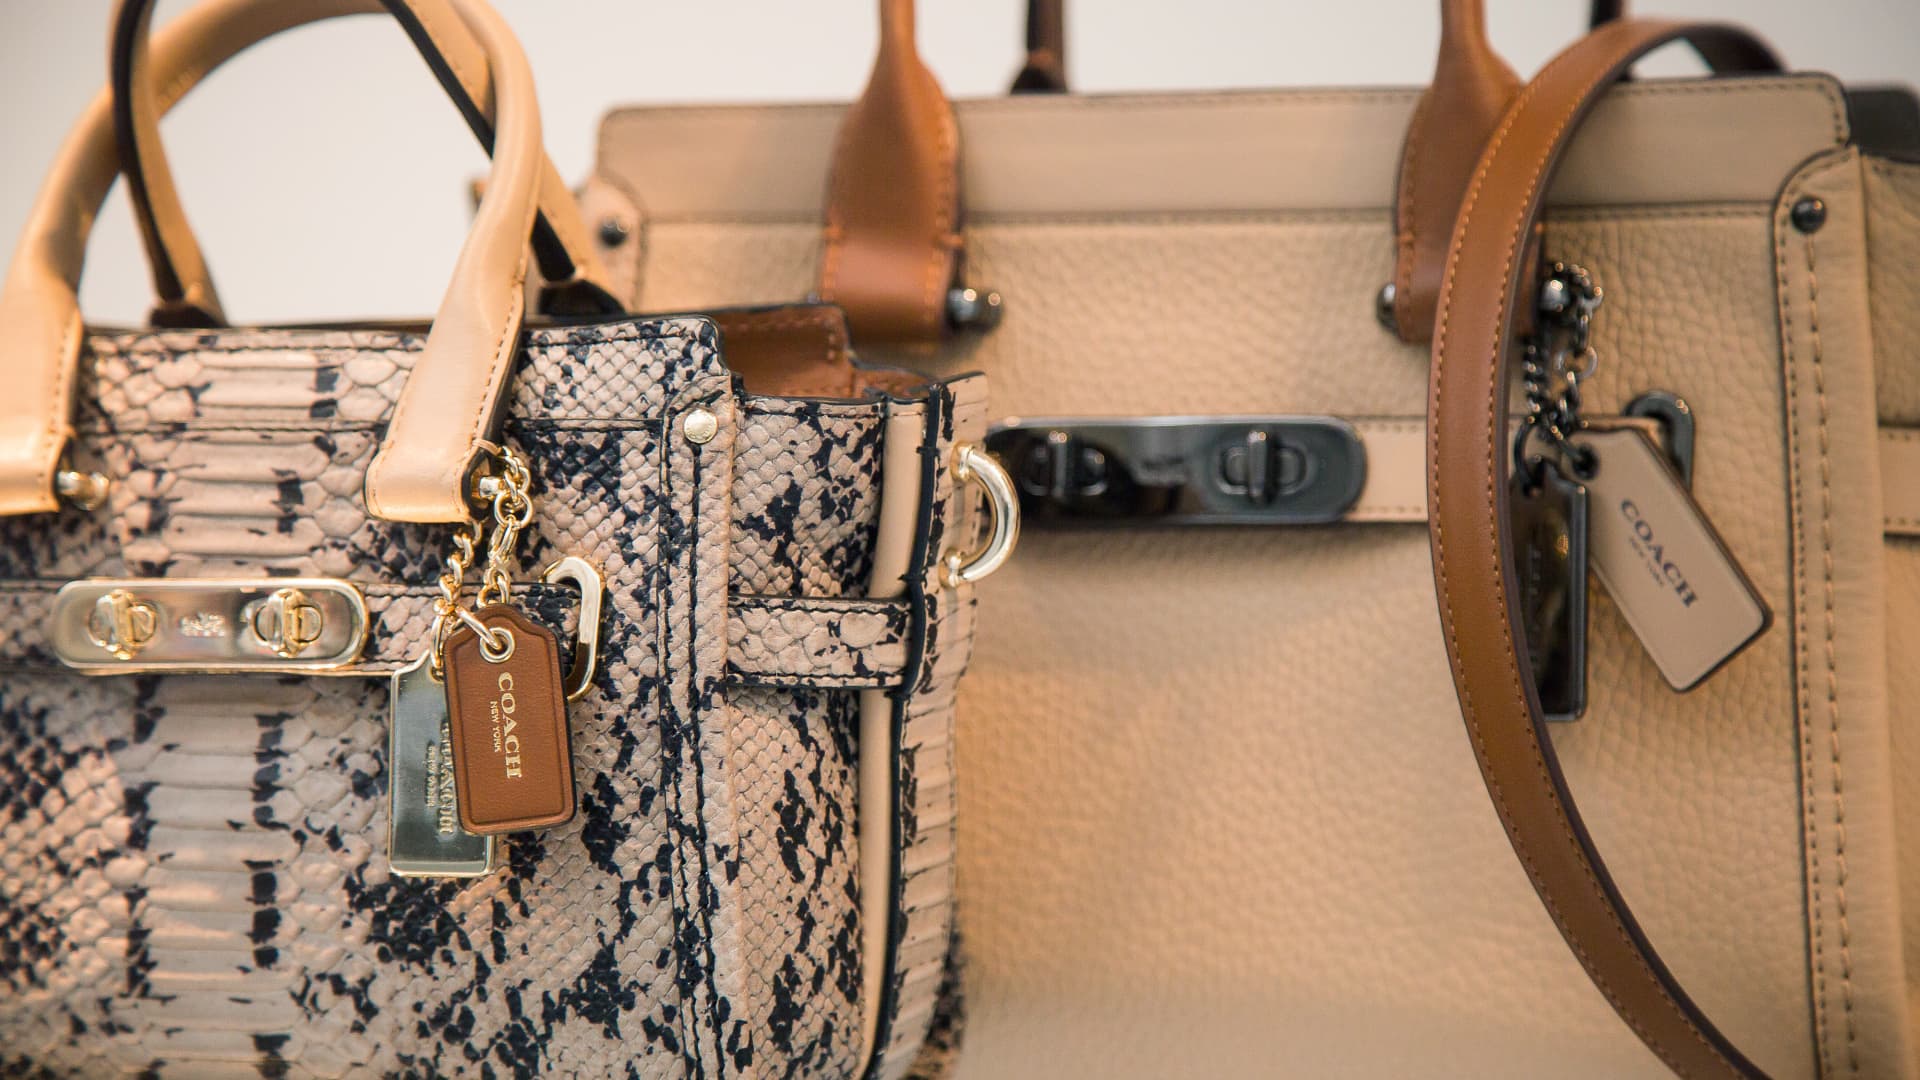 Goldman sees Coach ruling the handbag market after the Kate Spade purchase